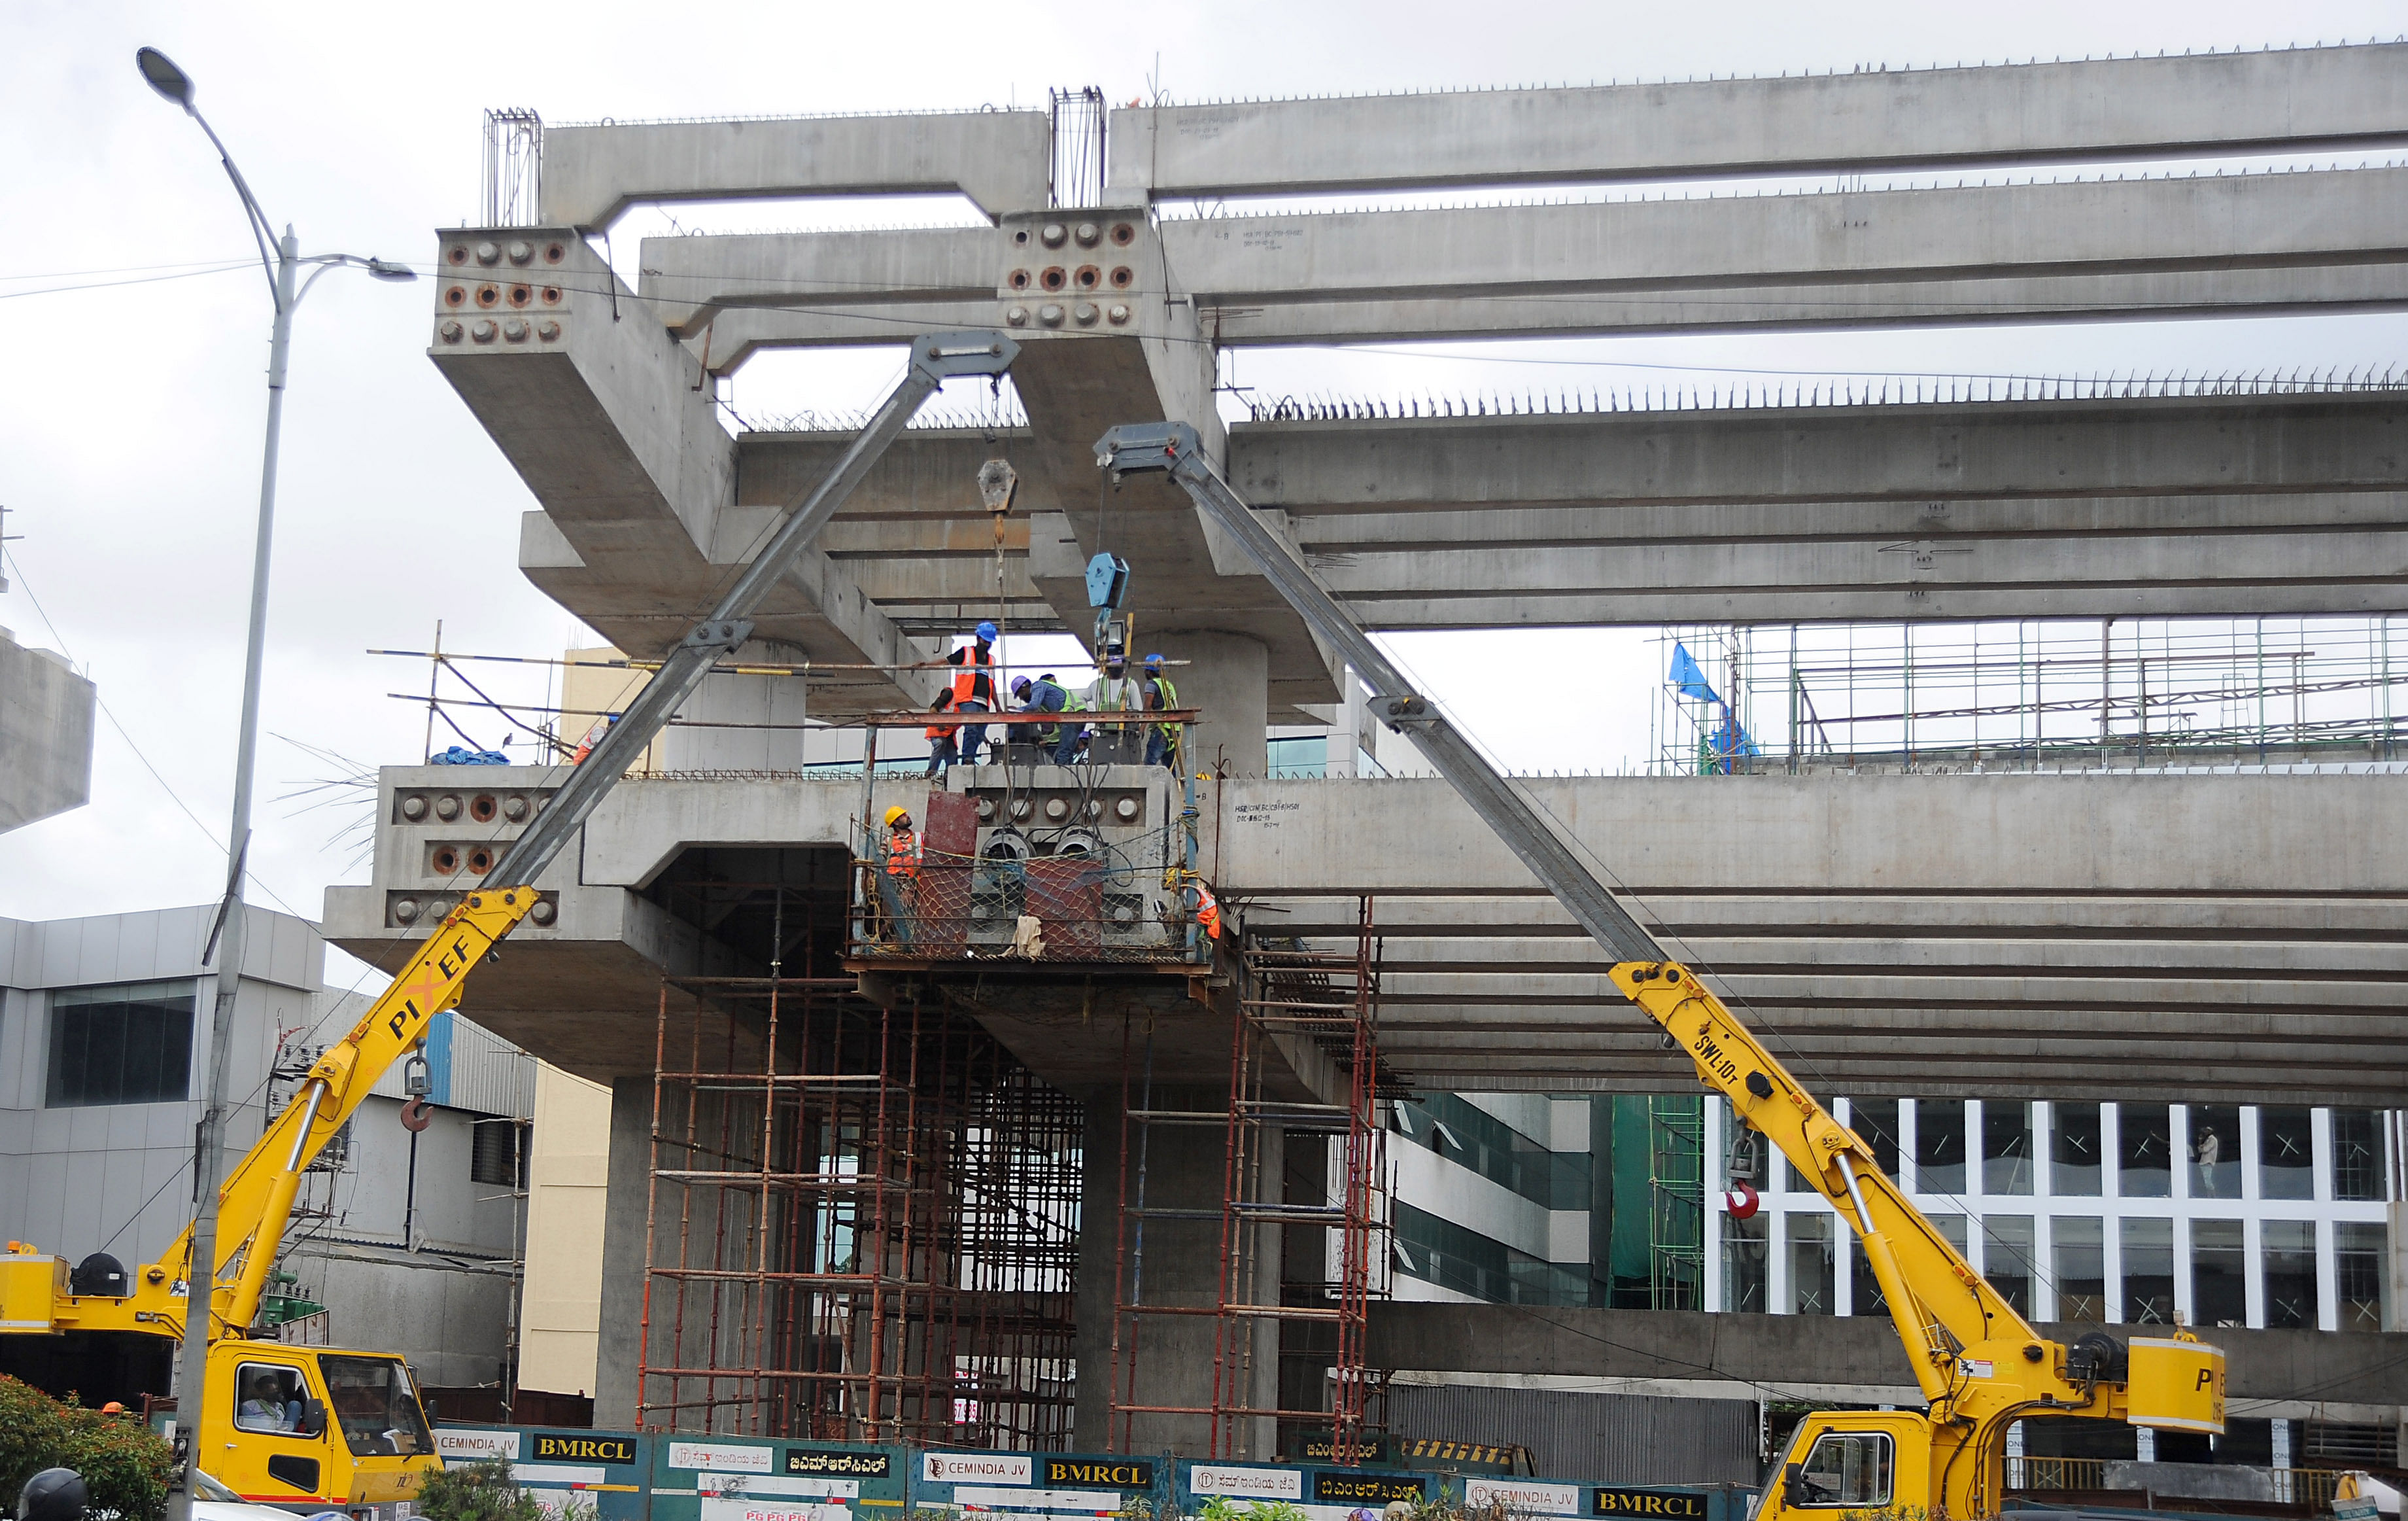 On-going metro construction work at Hosur road in Bengaluru on Thursday. Credit: DH Photo/Pushkar V